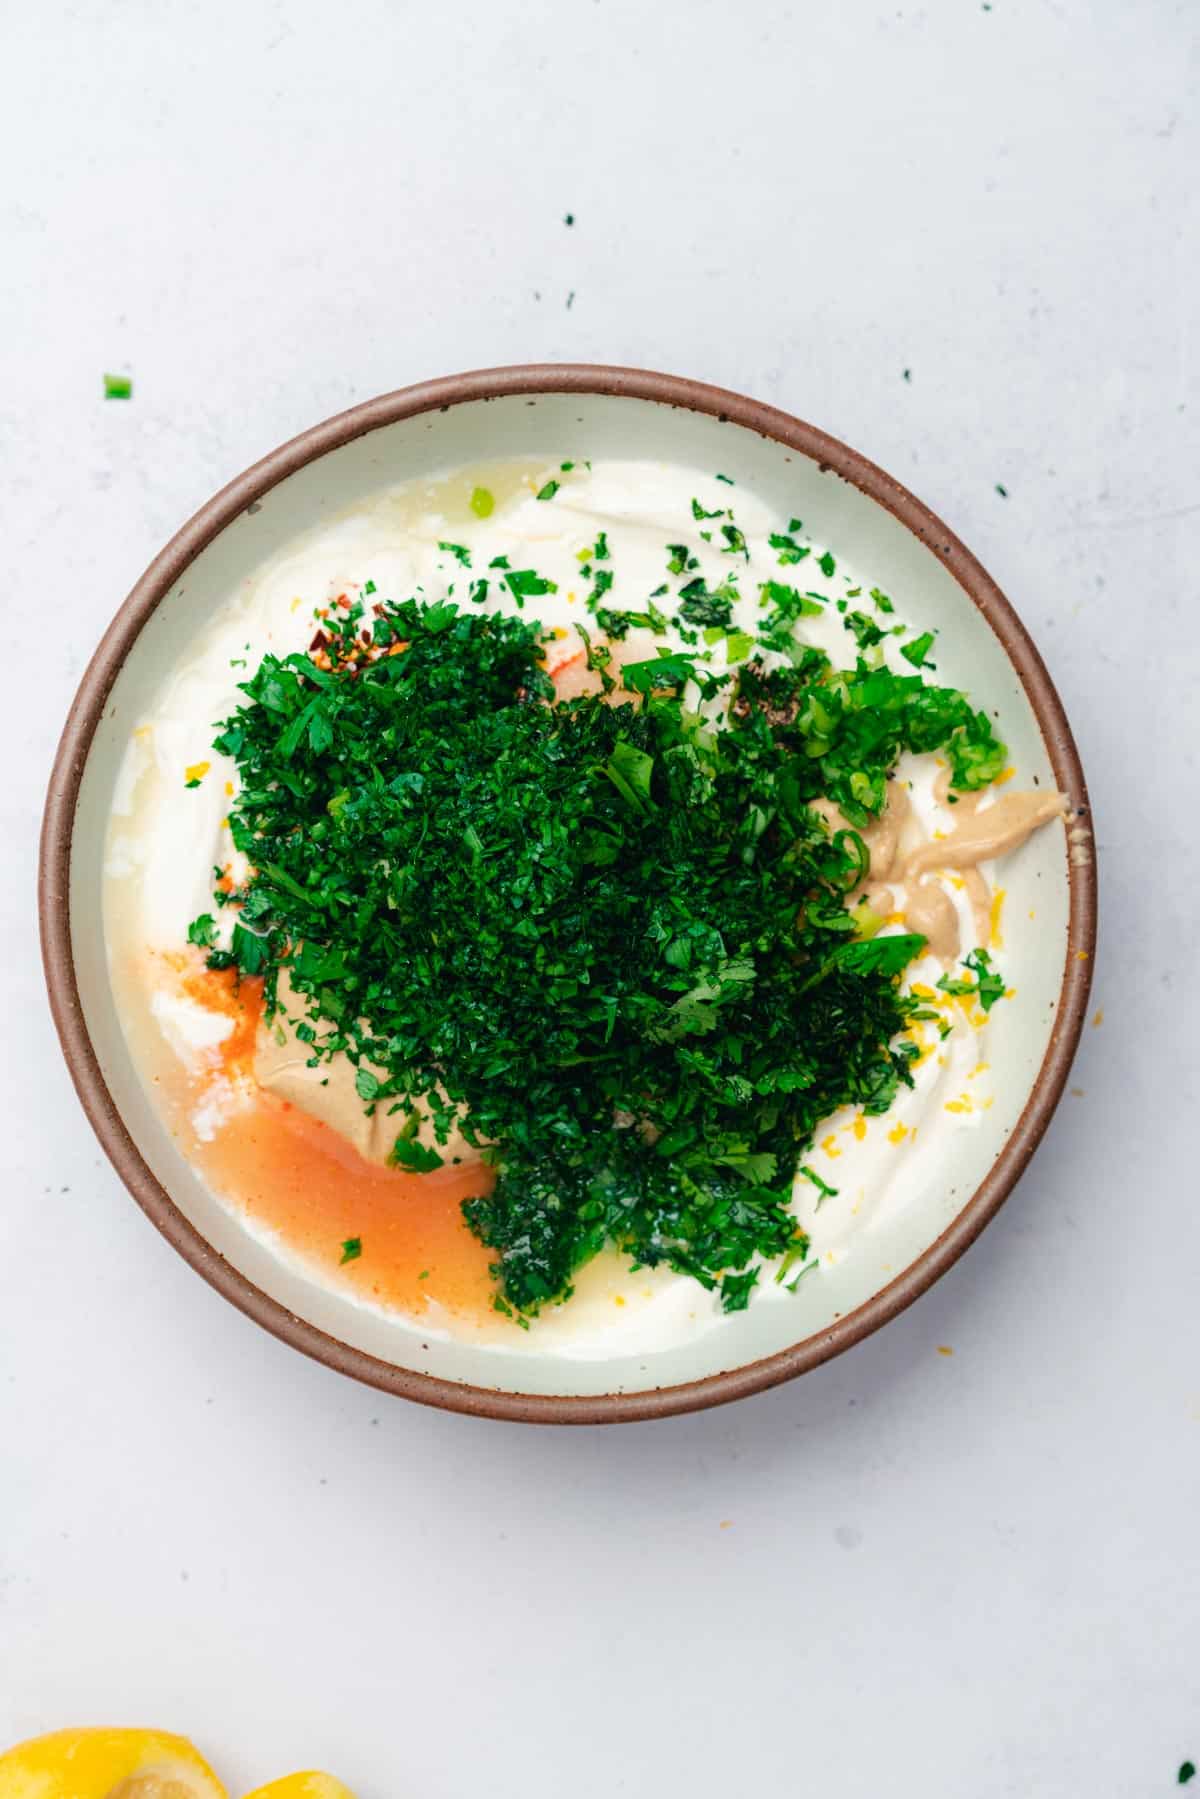 sour cream with lots of seasonings and fresh green herbs